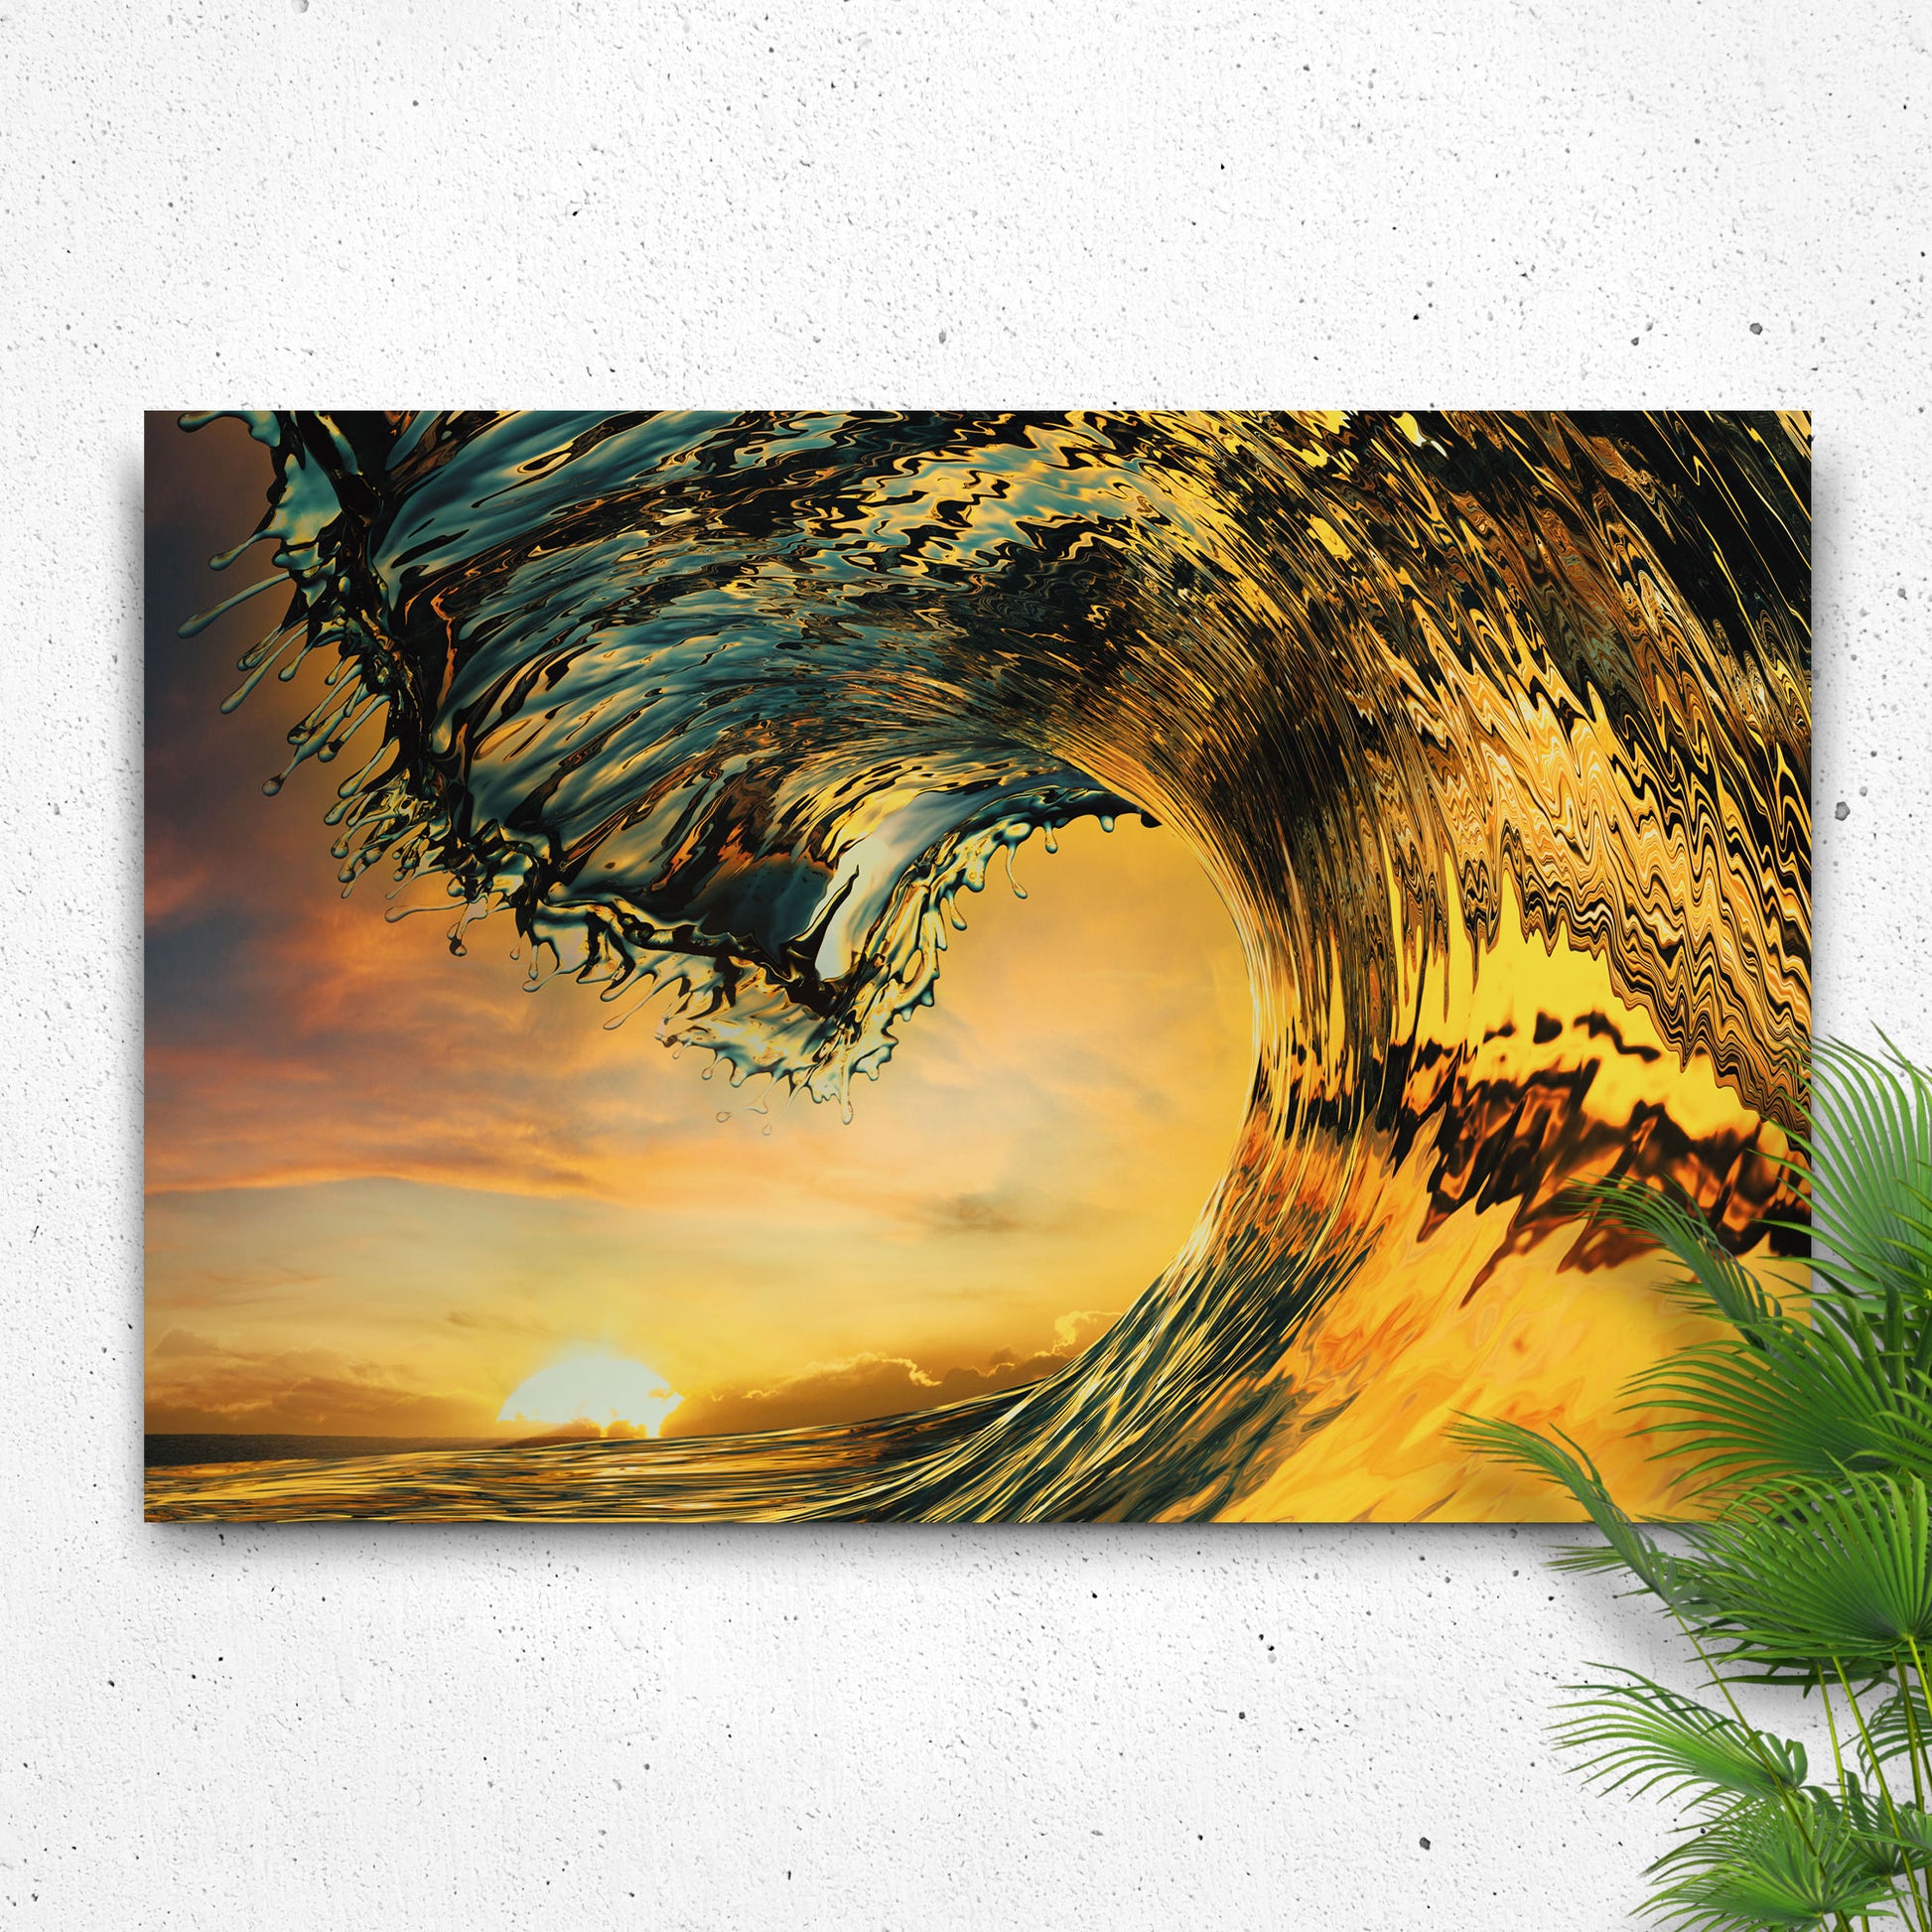 Sunset Ocean Wave Canvas Wall Art - Image by Tailored Canvases